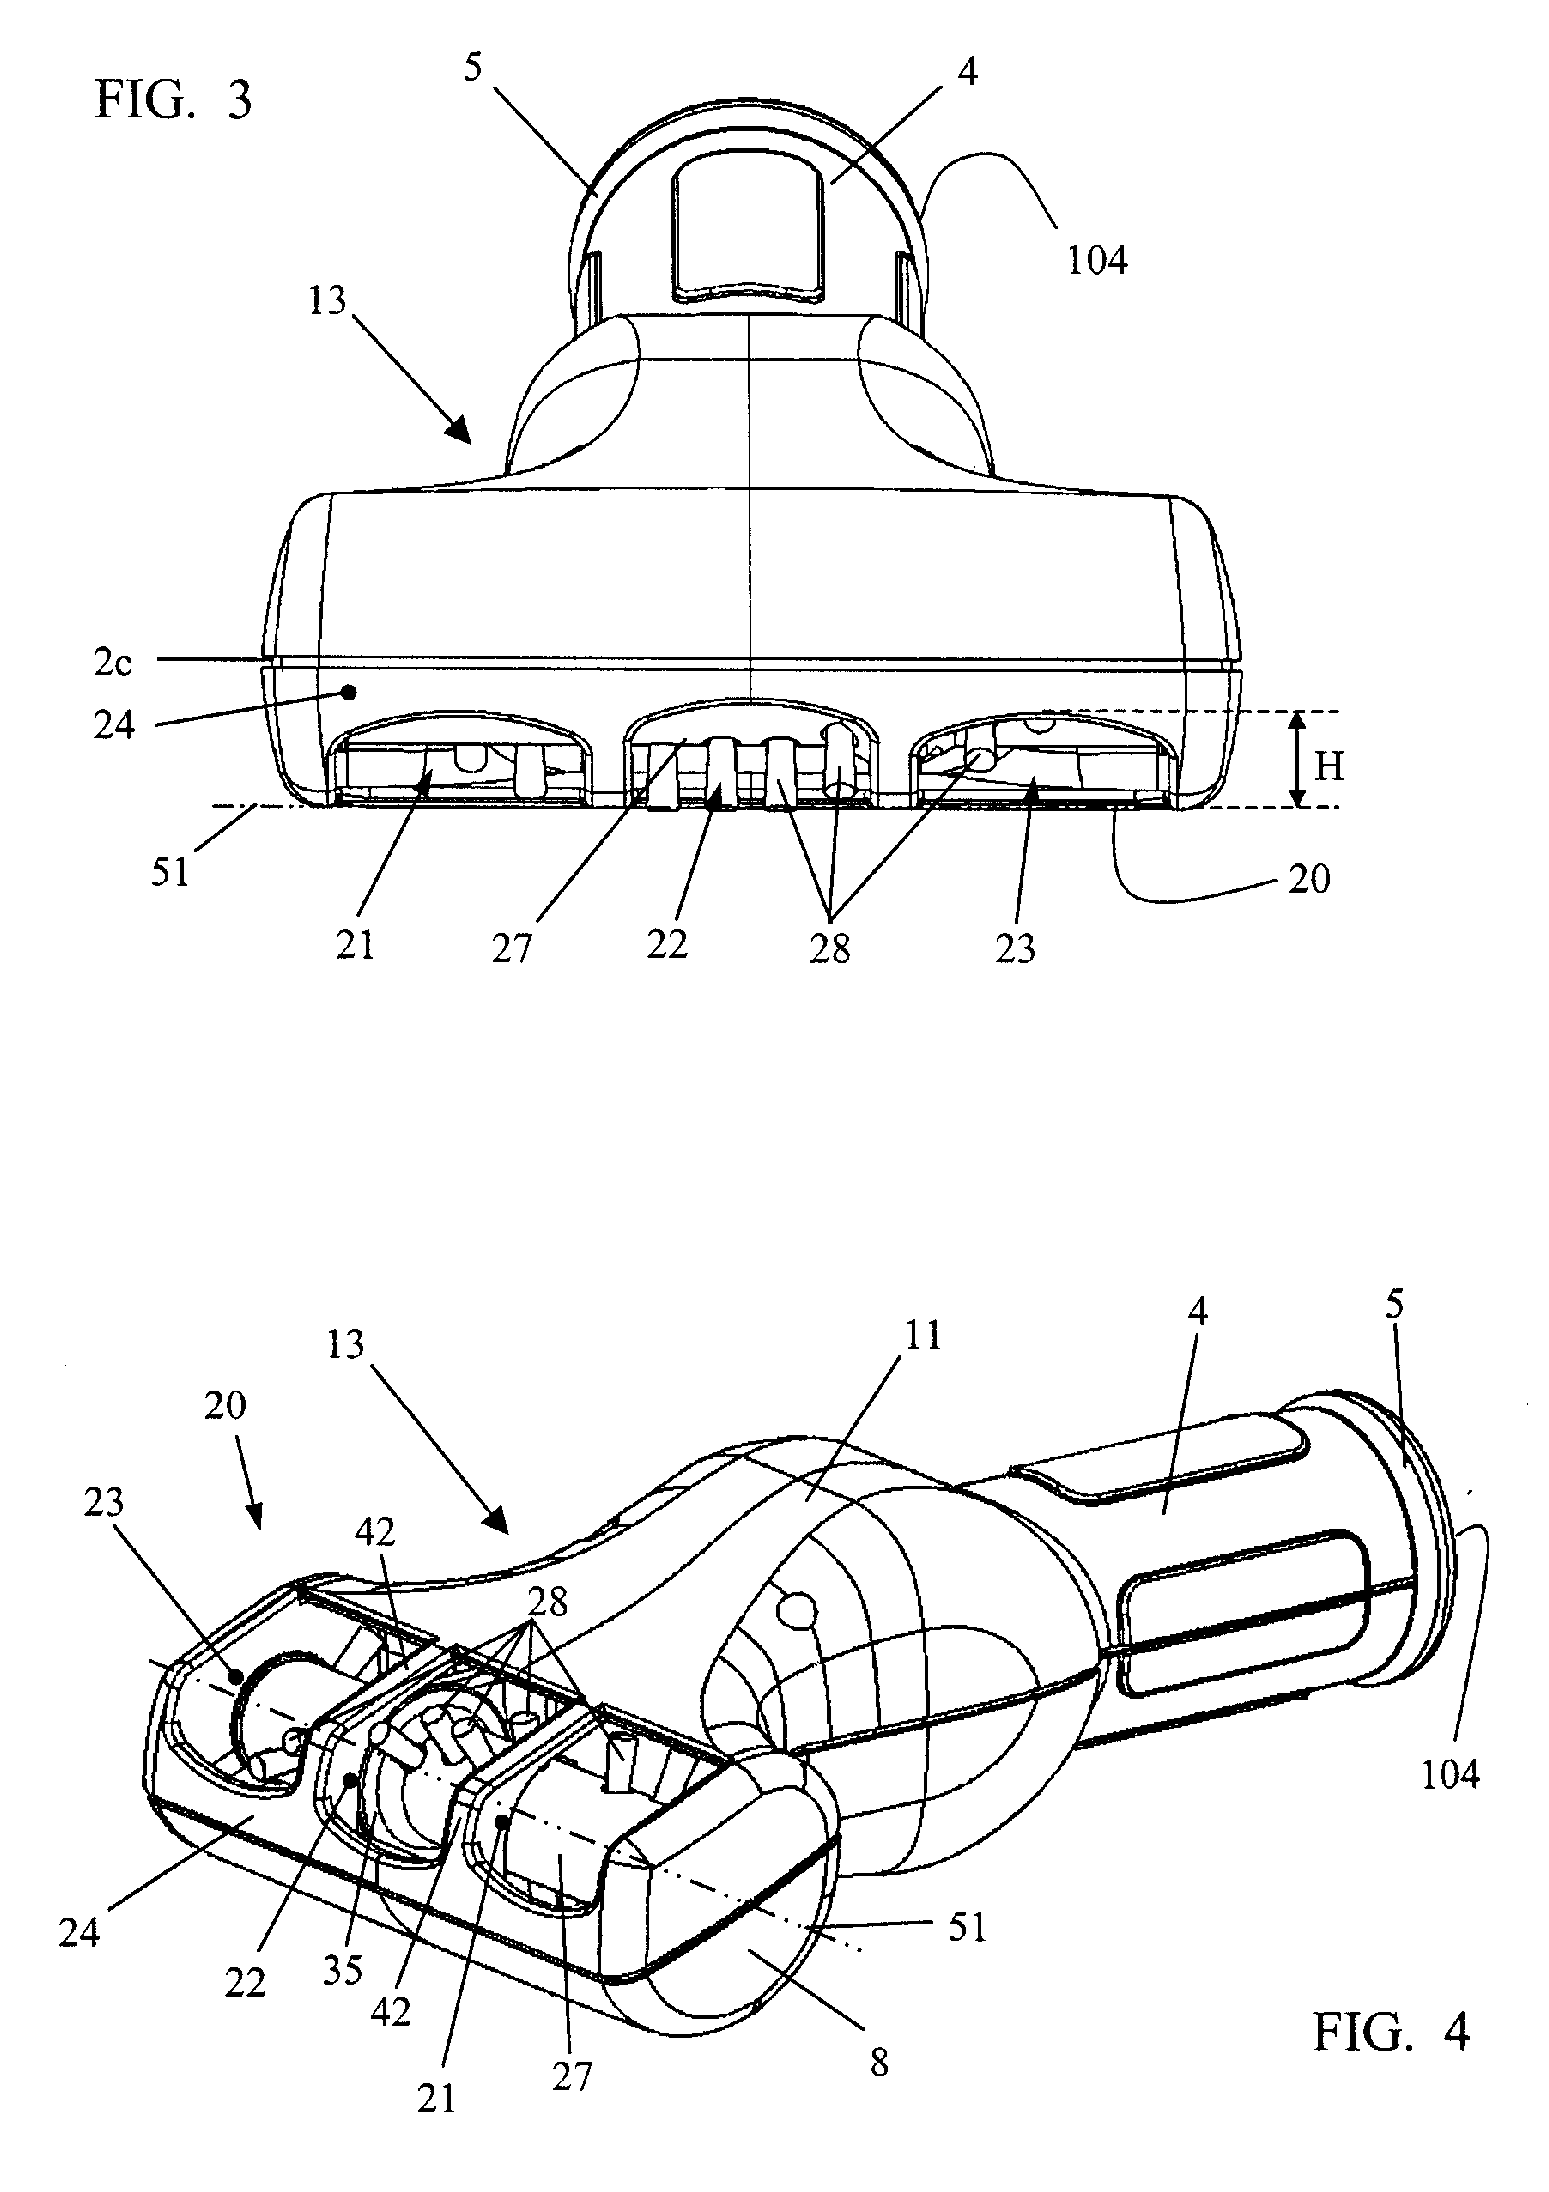 Vacuum Cleaning Tool, Especially Hand-Held Nozzle, for a Vacuum Cleaner